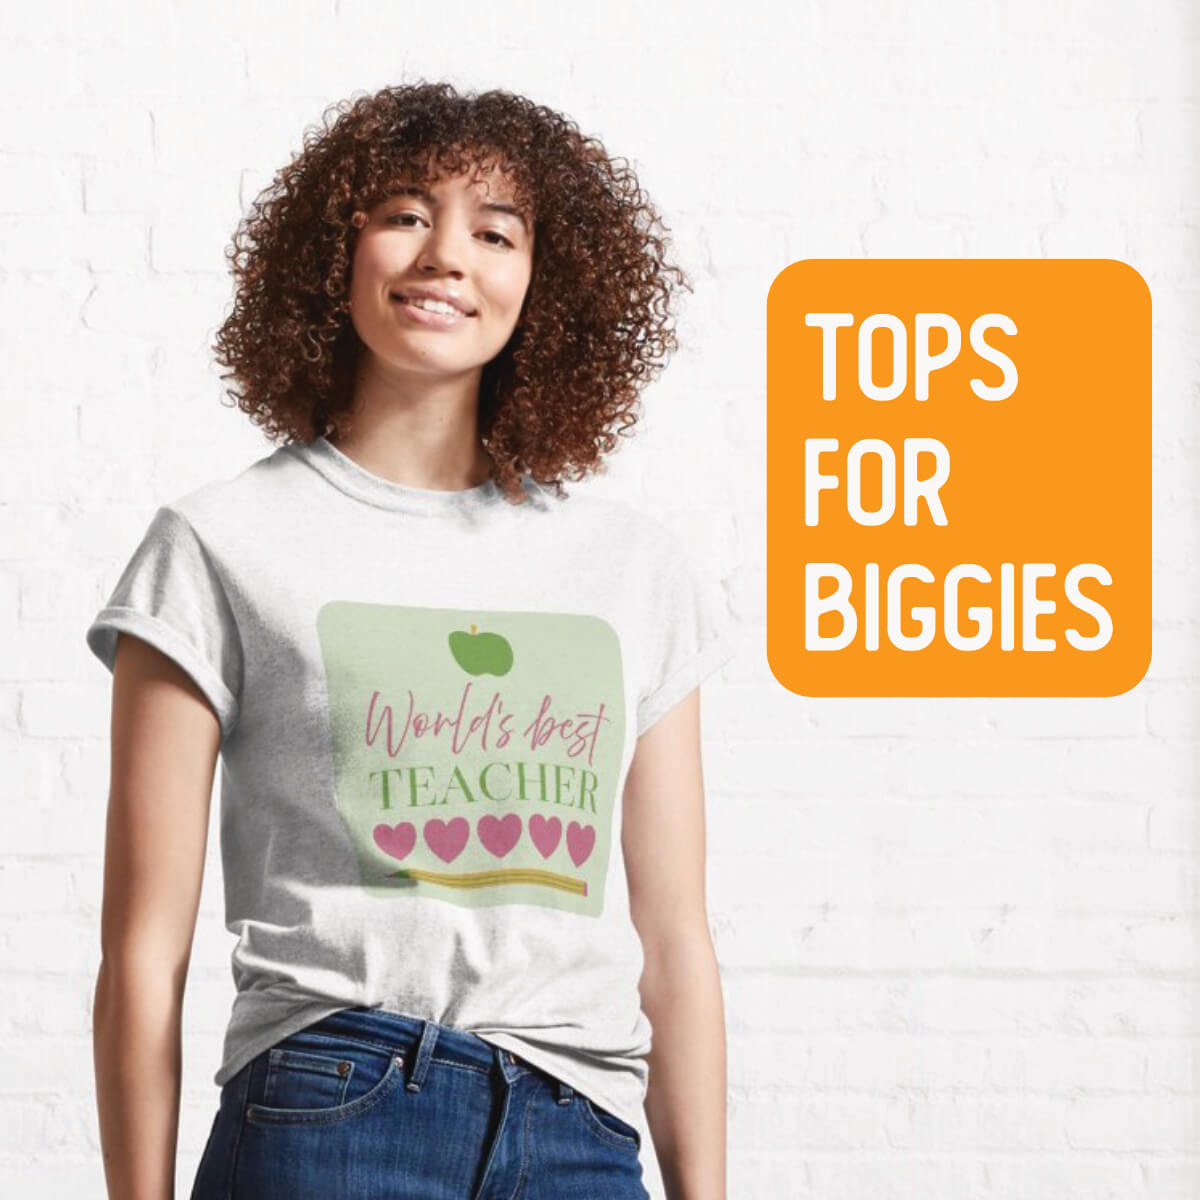 Haluna Happy Names World's Best Teacher design is printed on a classic white T-shirt worn by a smiling young woman with brown tight curly shoulder length hair